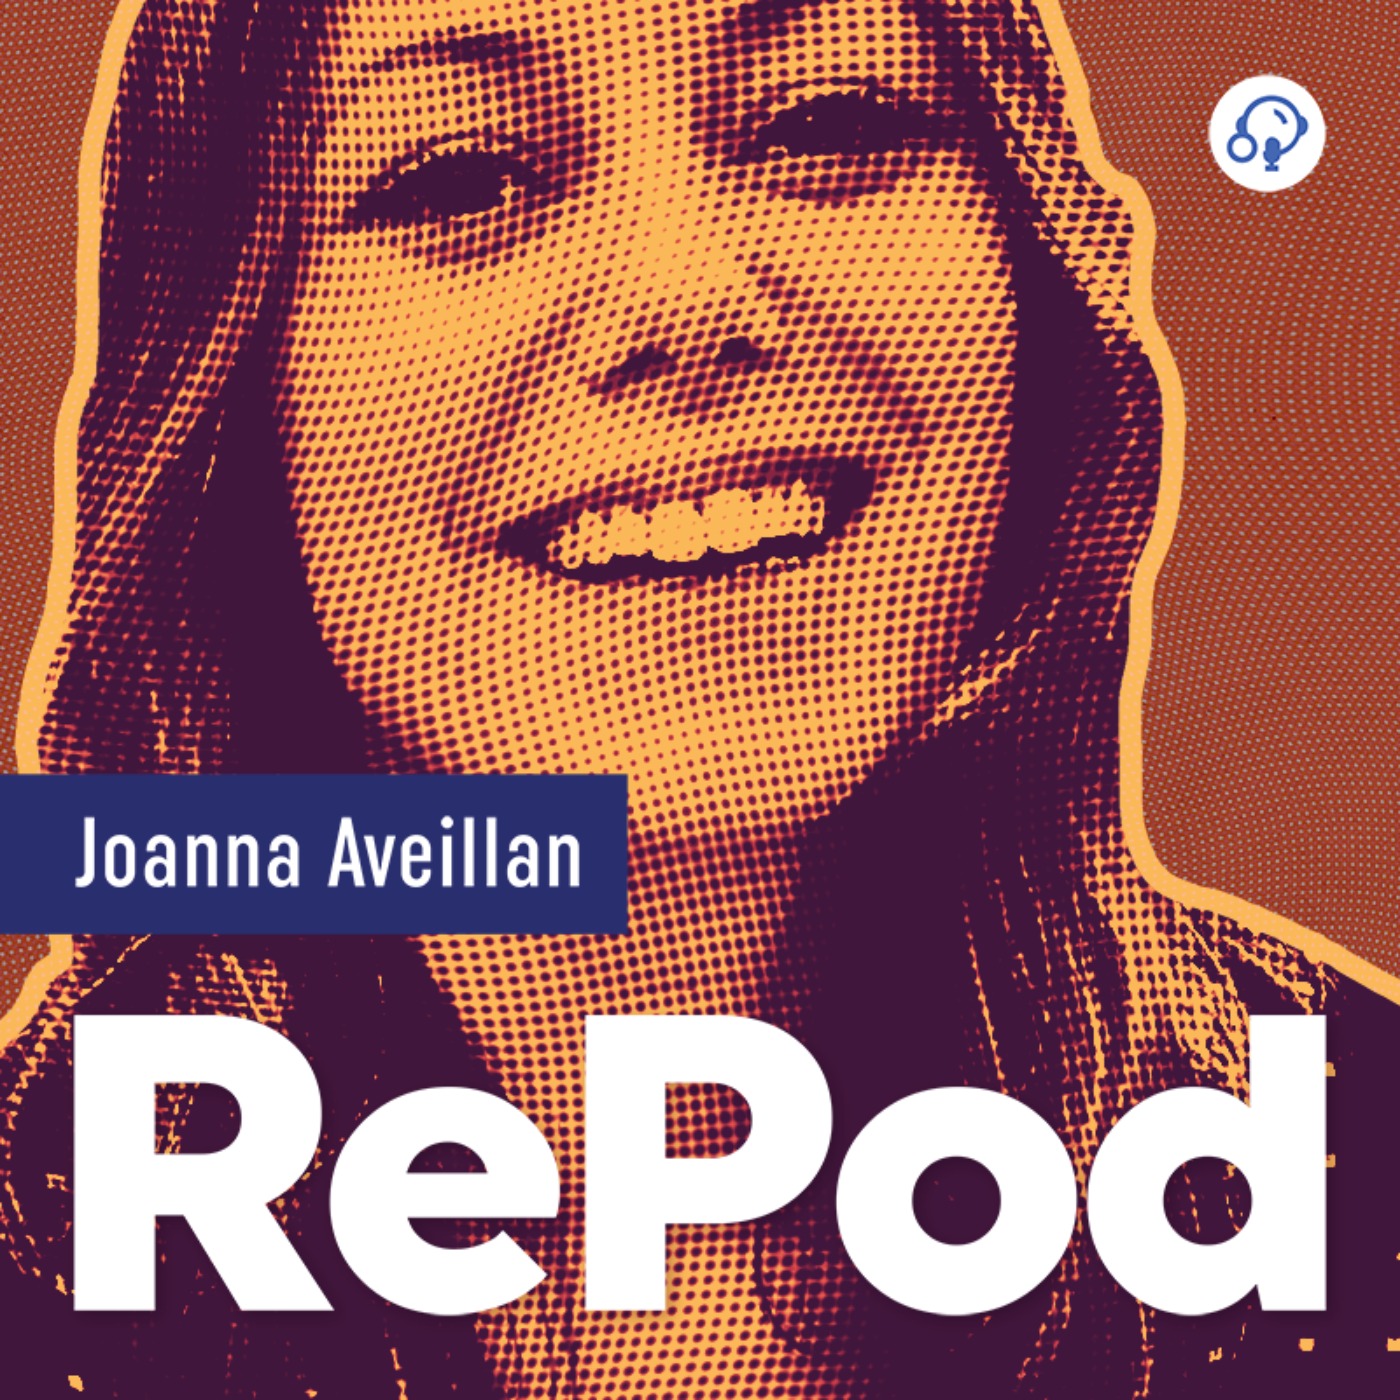 cover art for Podcasting in Europe at a glance. With Joanna Aveillan - International Expansion Director at Acast